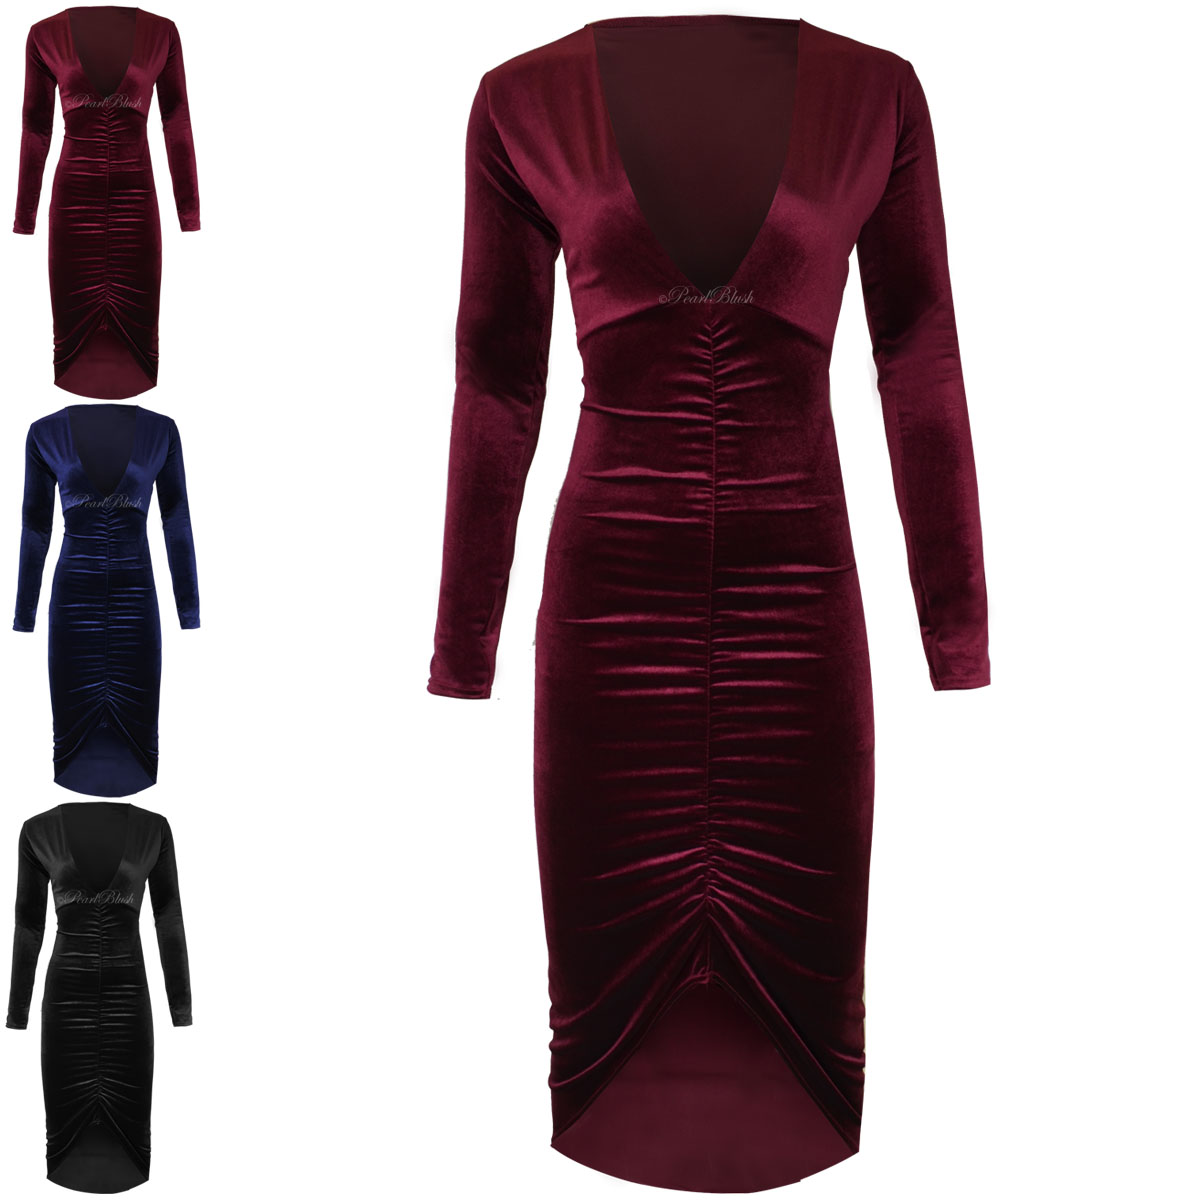 LADIES WOMENS NEW VELVET VELOUR PLUNGE NECK RUCHED DRESS PARTY BODYCON ...